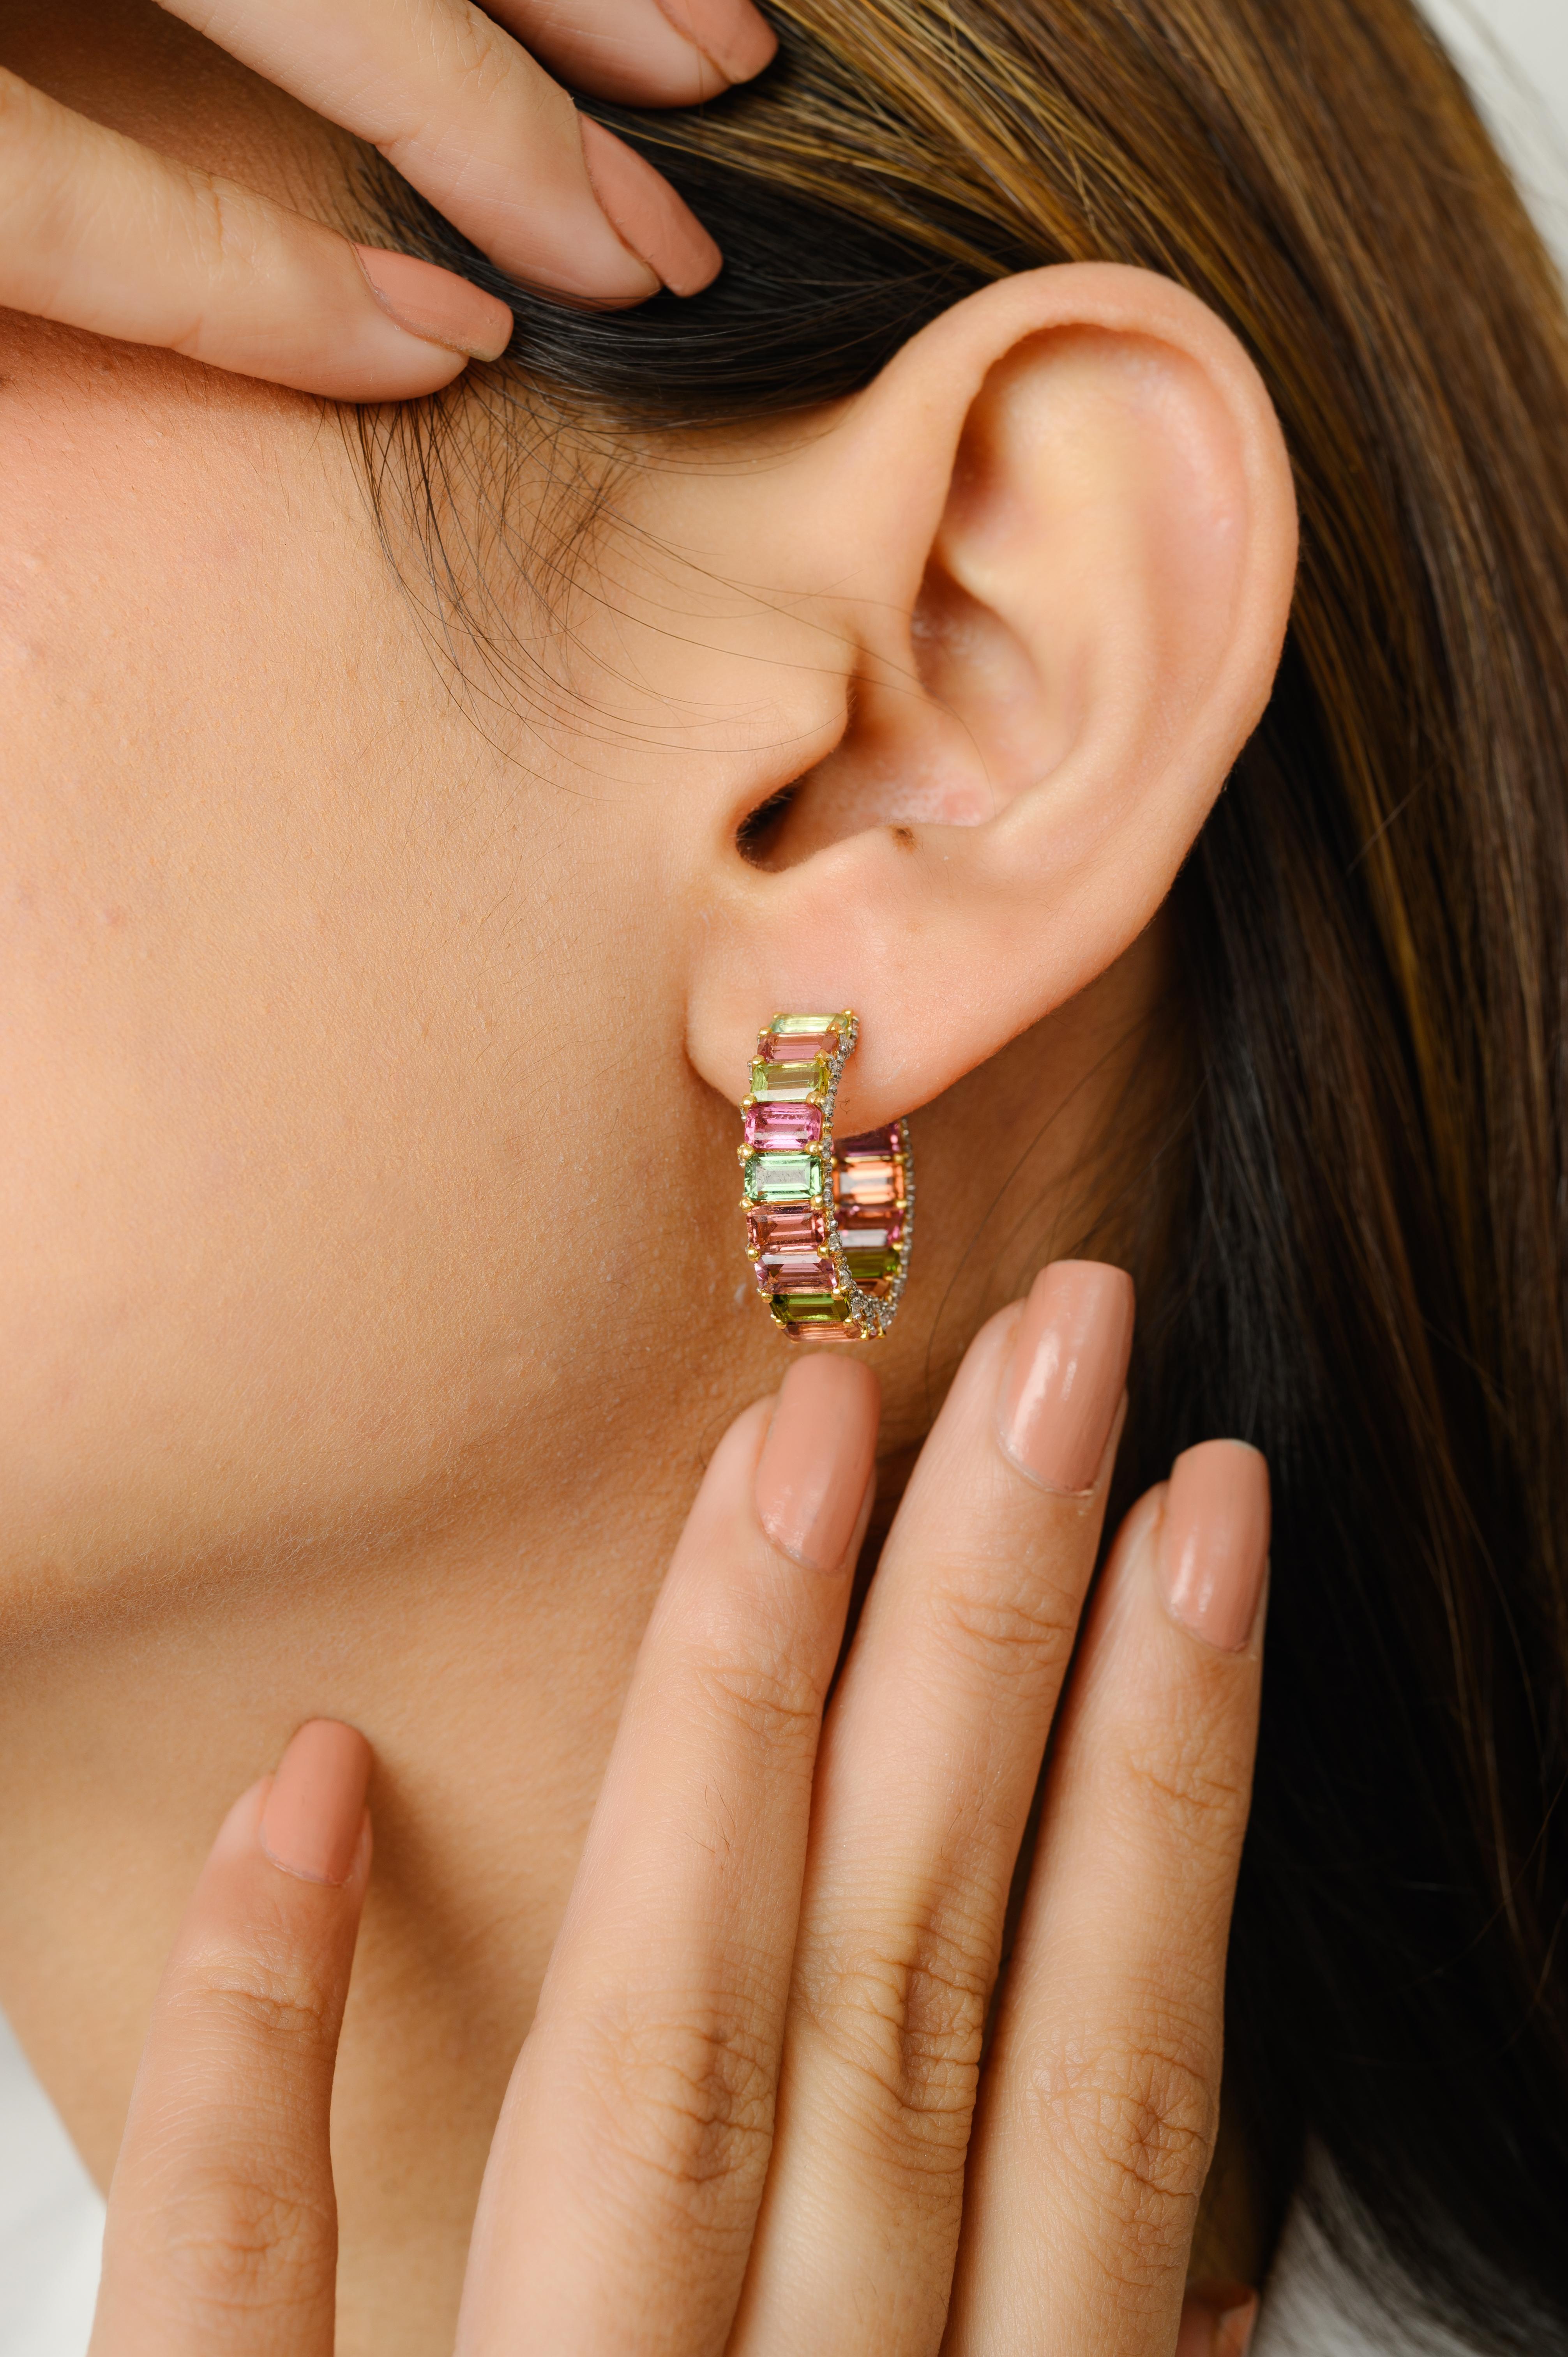 One-of-a-kind Baguette Cut Multi Tourmaline and Diamond C-Hoop Earrings in 14K Gold to make a statement with your look. You shall need small hoops earrings to make a statement with your look. These earrings create a sparkling, luxurious look